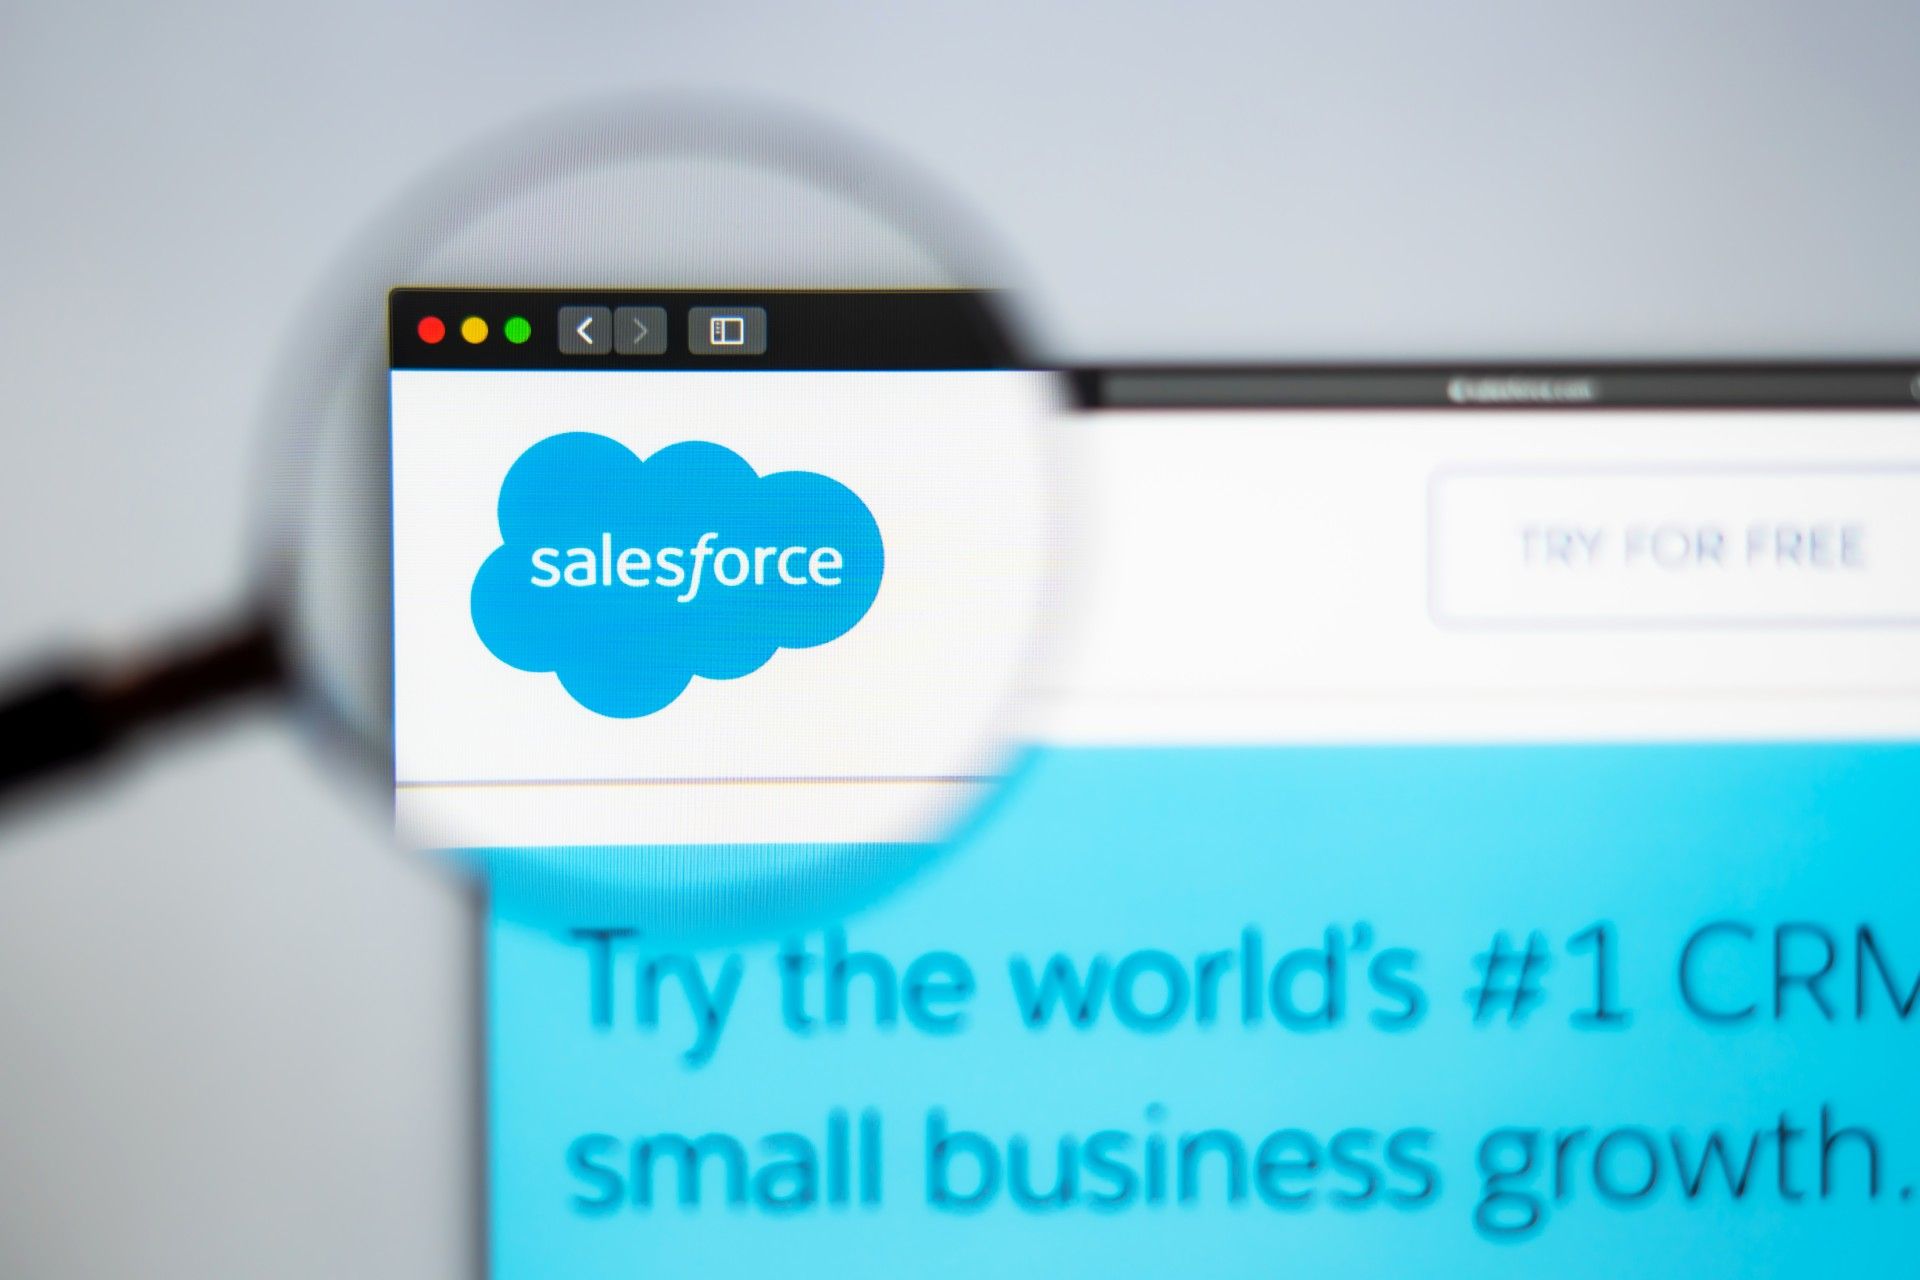 A magnifying glass magnifies the Salesforce logo on the company's website - data breach